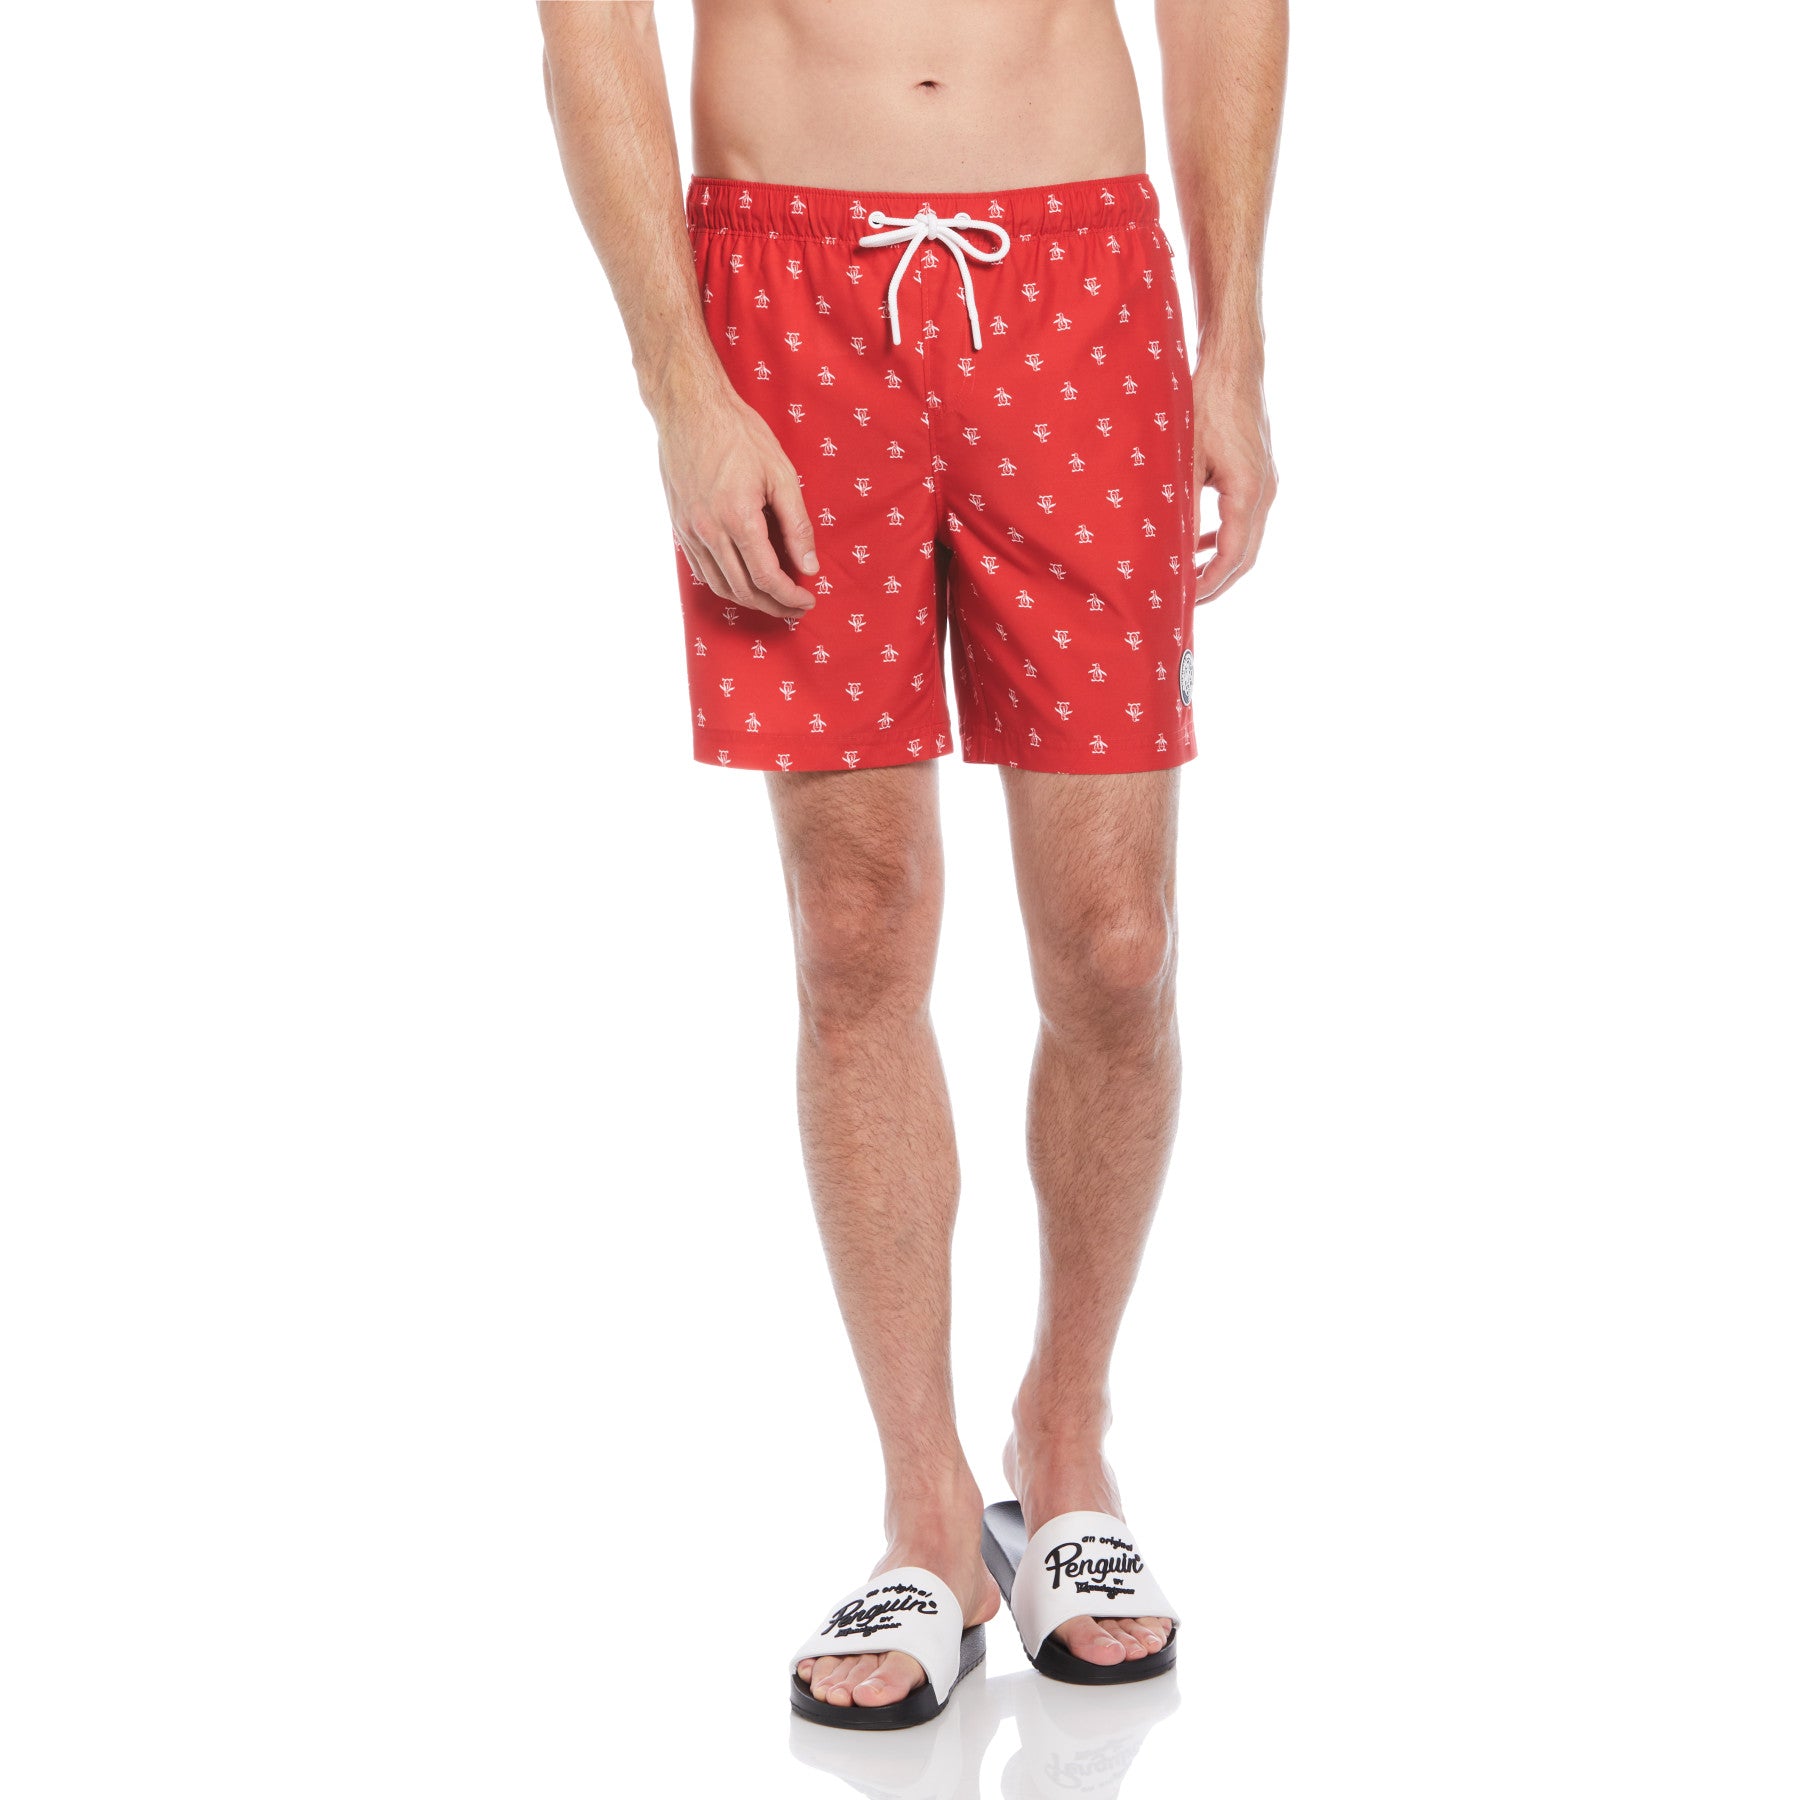 View Repete Print Swim Shorts In Salsa information